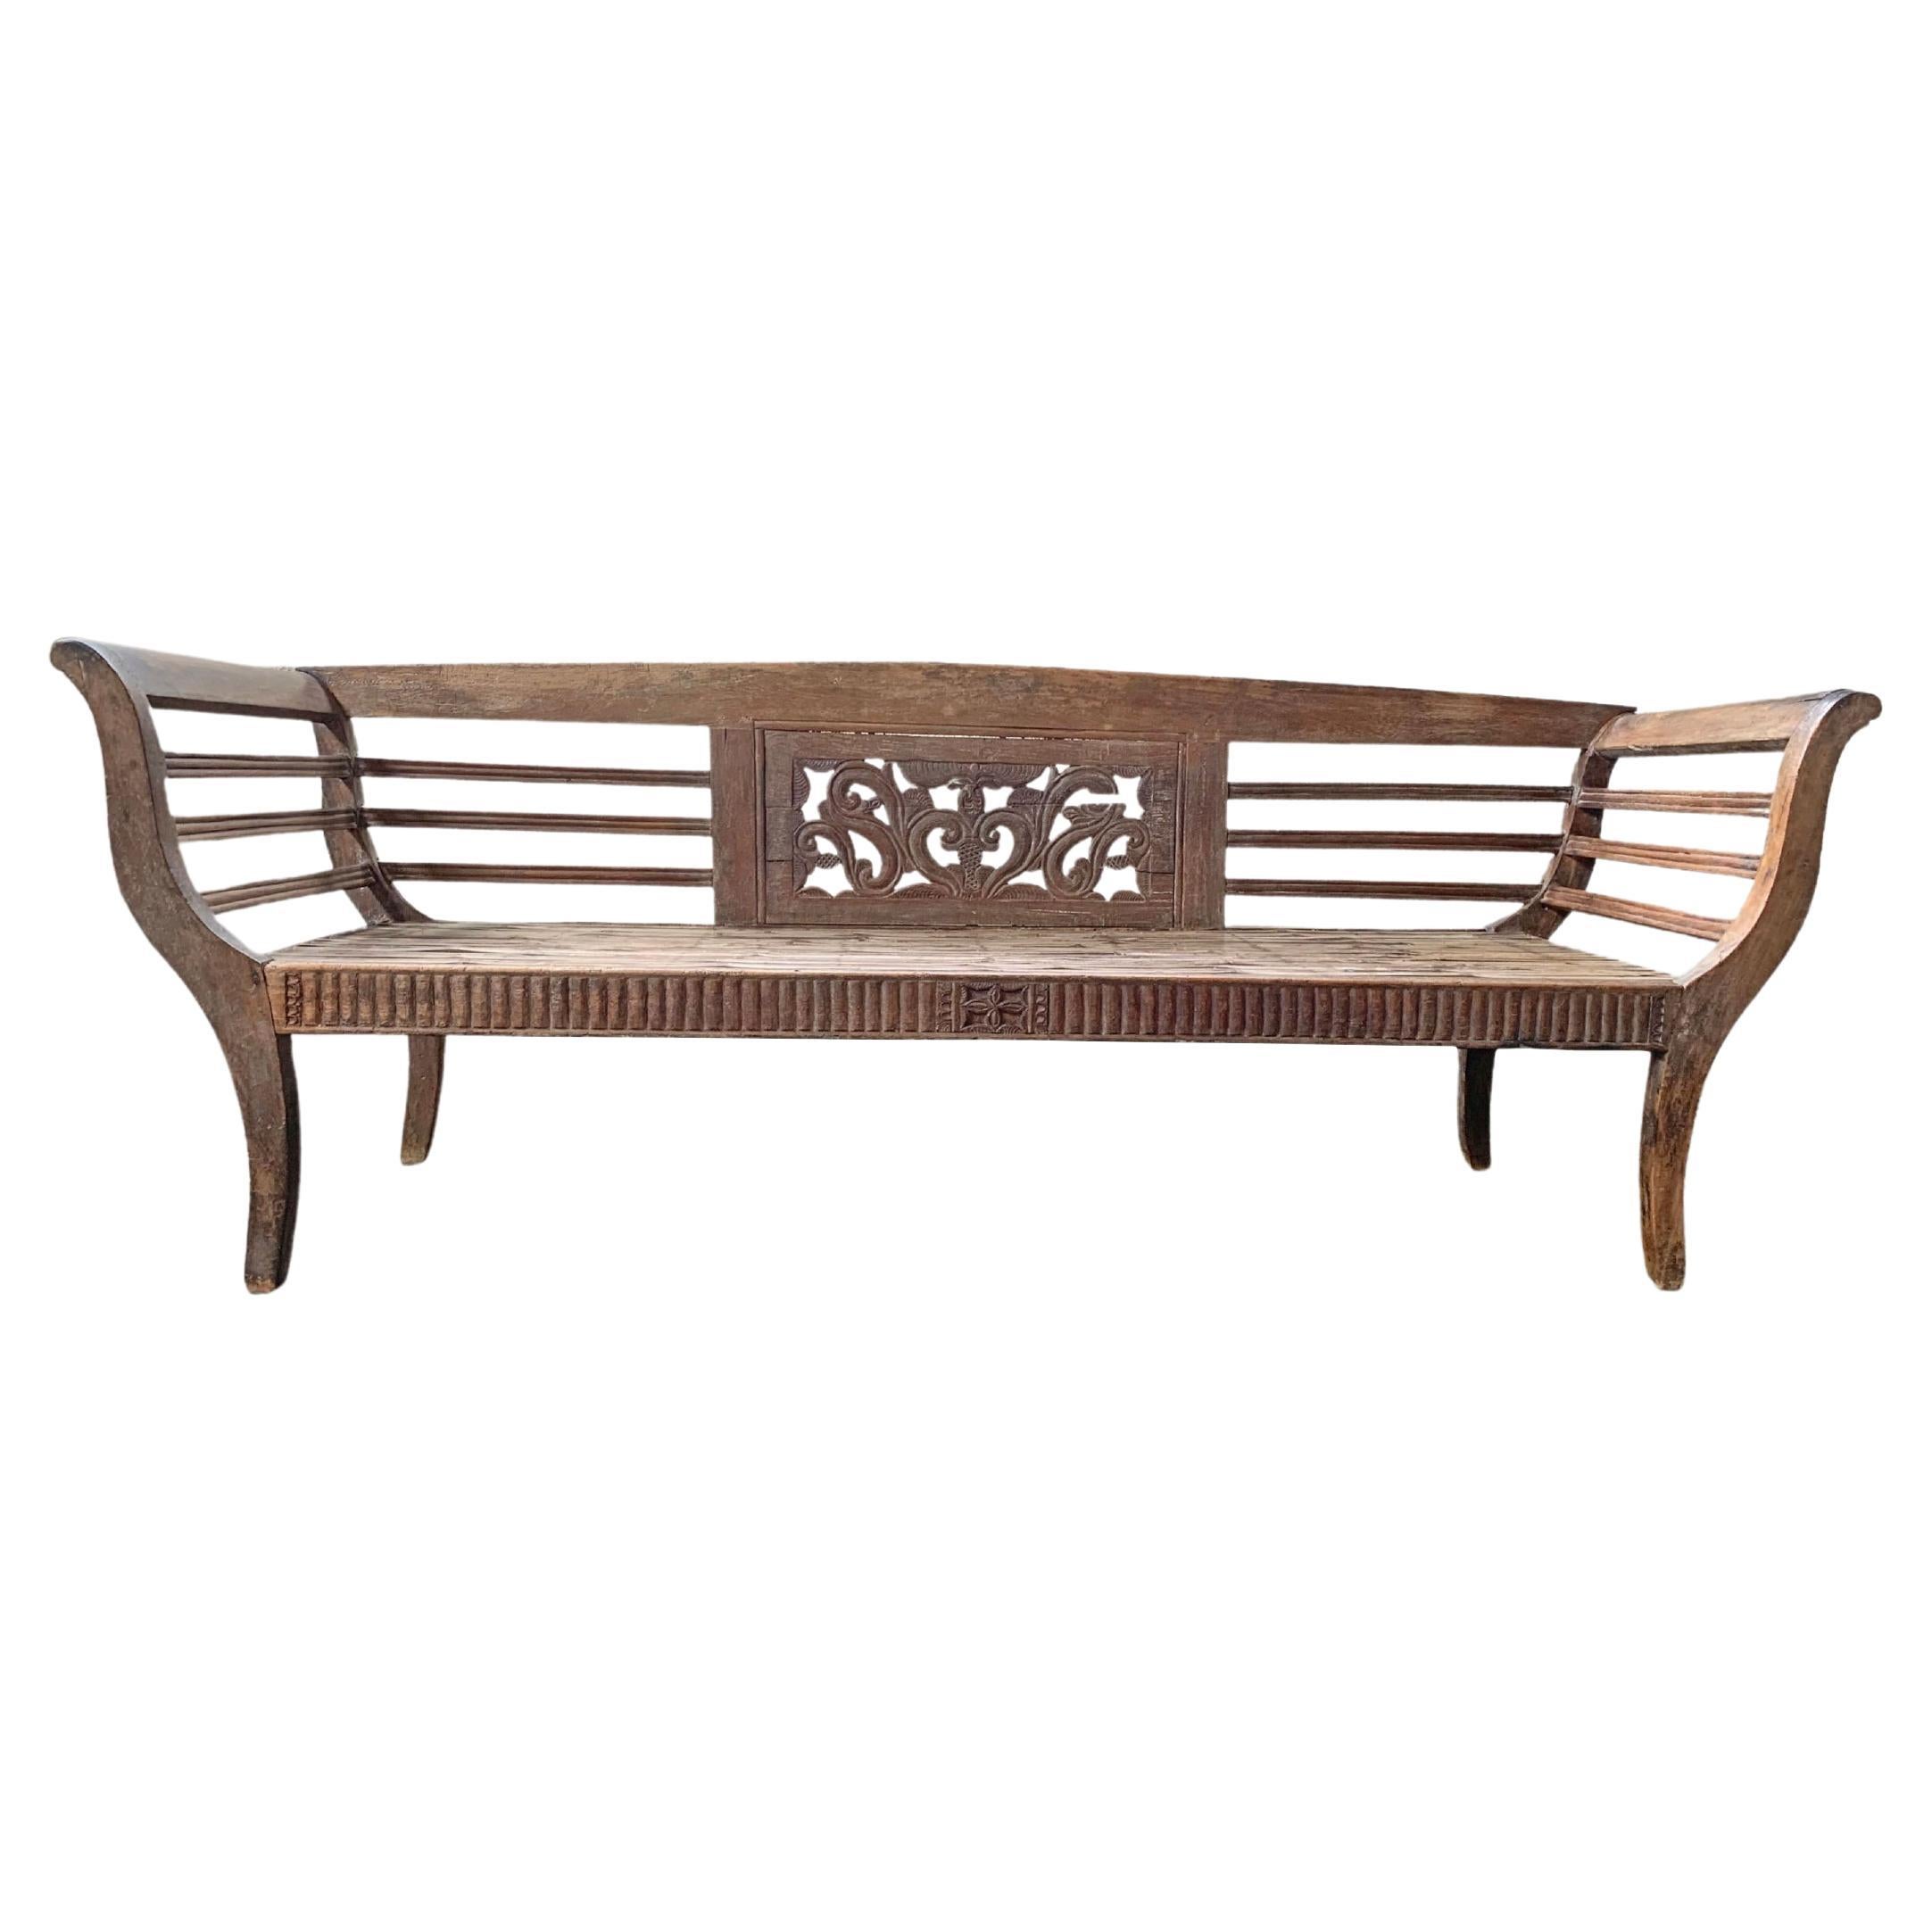 Teak & Bamboo Bench with Carved Detailing Madura Island, Java, Indonesia c. 1950 For Sale